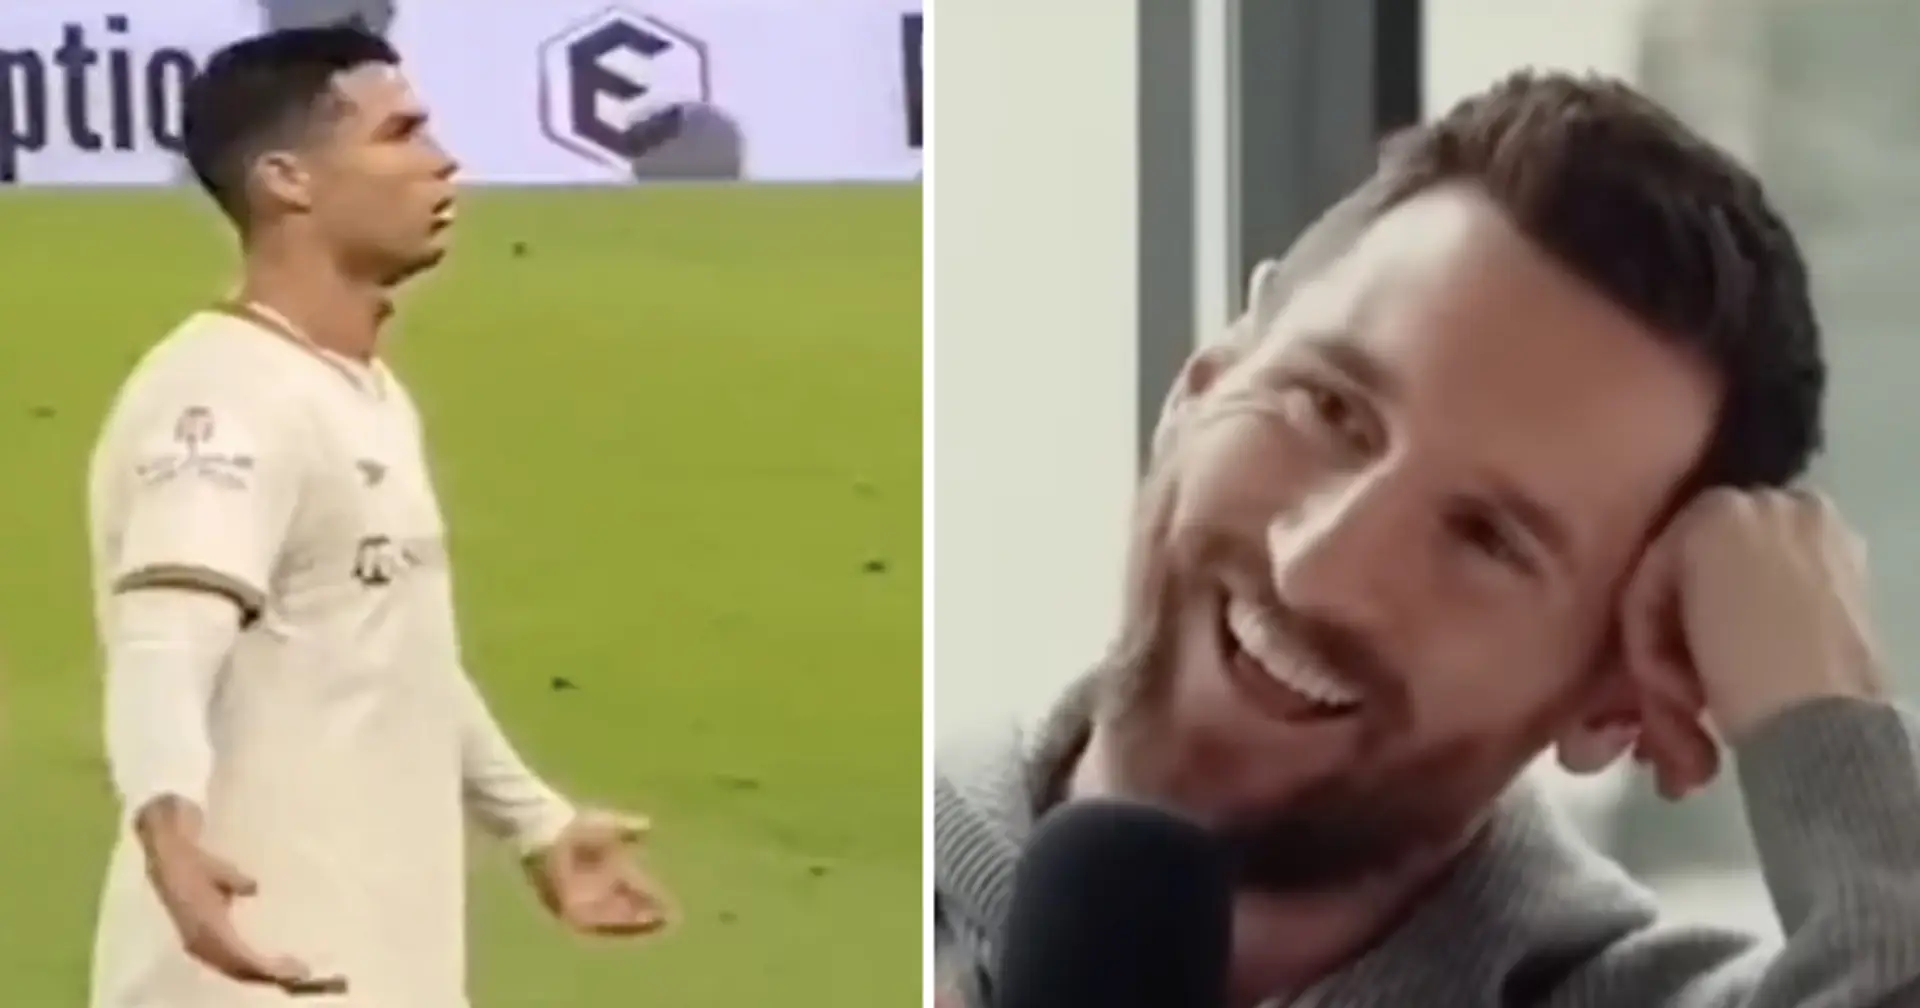 Rival fans chant Messi's name during Al Nassr game, Ronaldo's reaction spotted